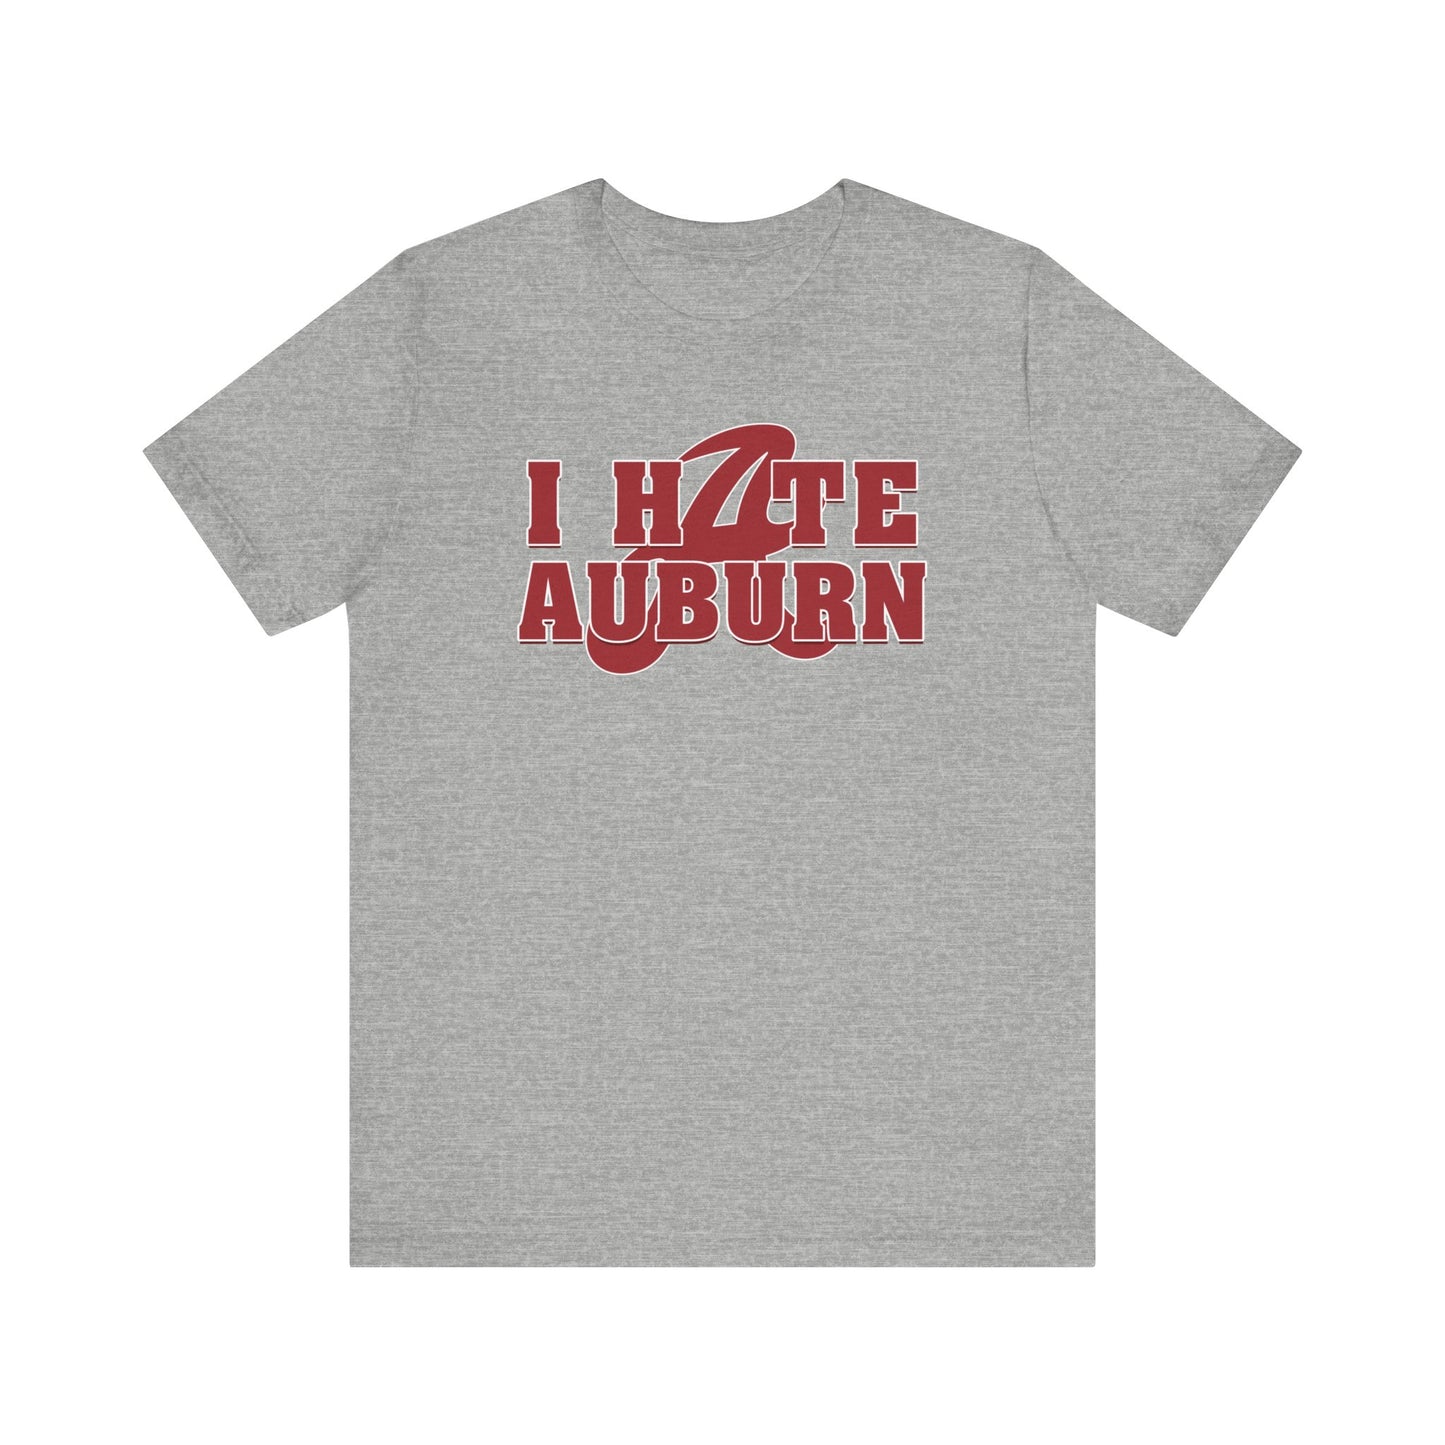 I Hate That Awbern Team (for Alabama fans) - Unisex Jersey Short Sleeve Tee